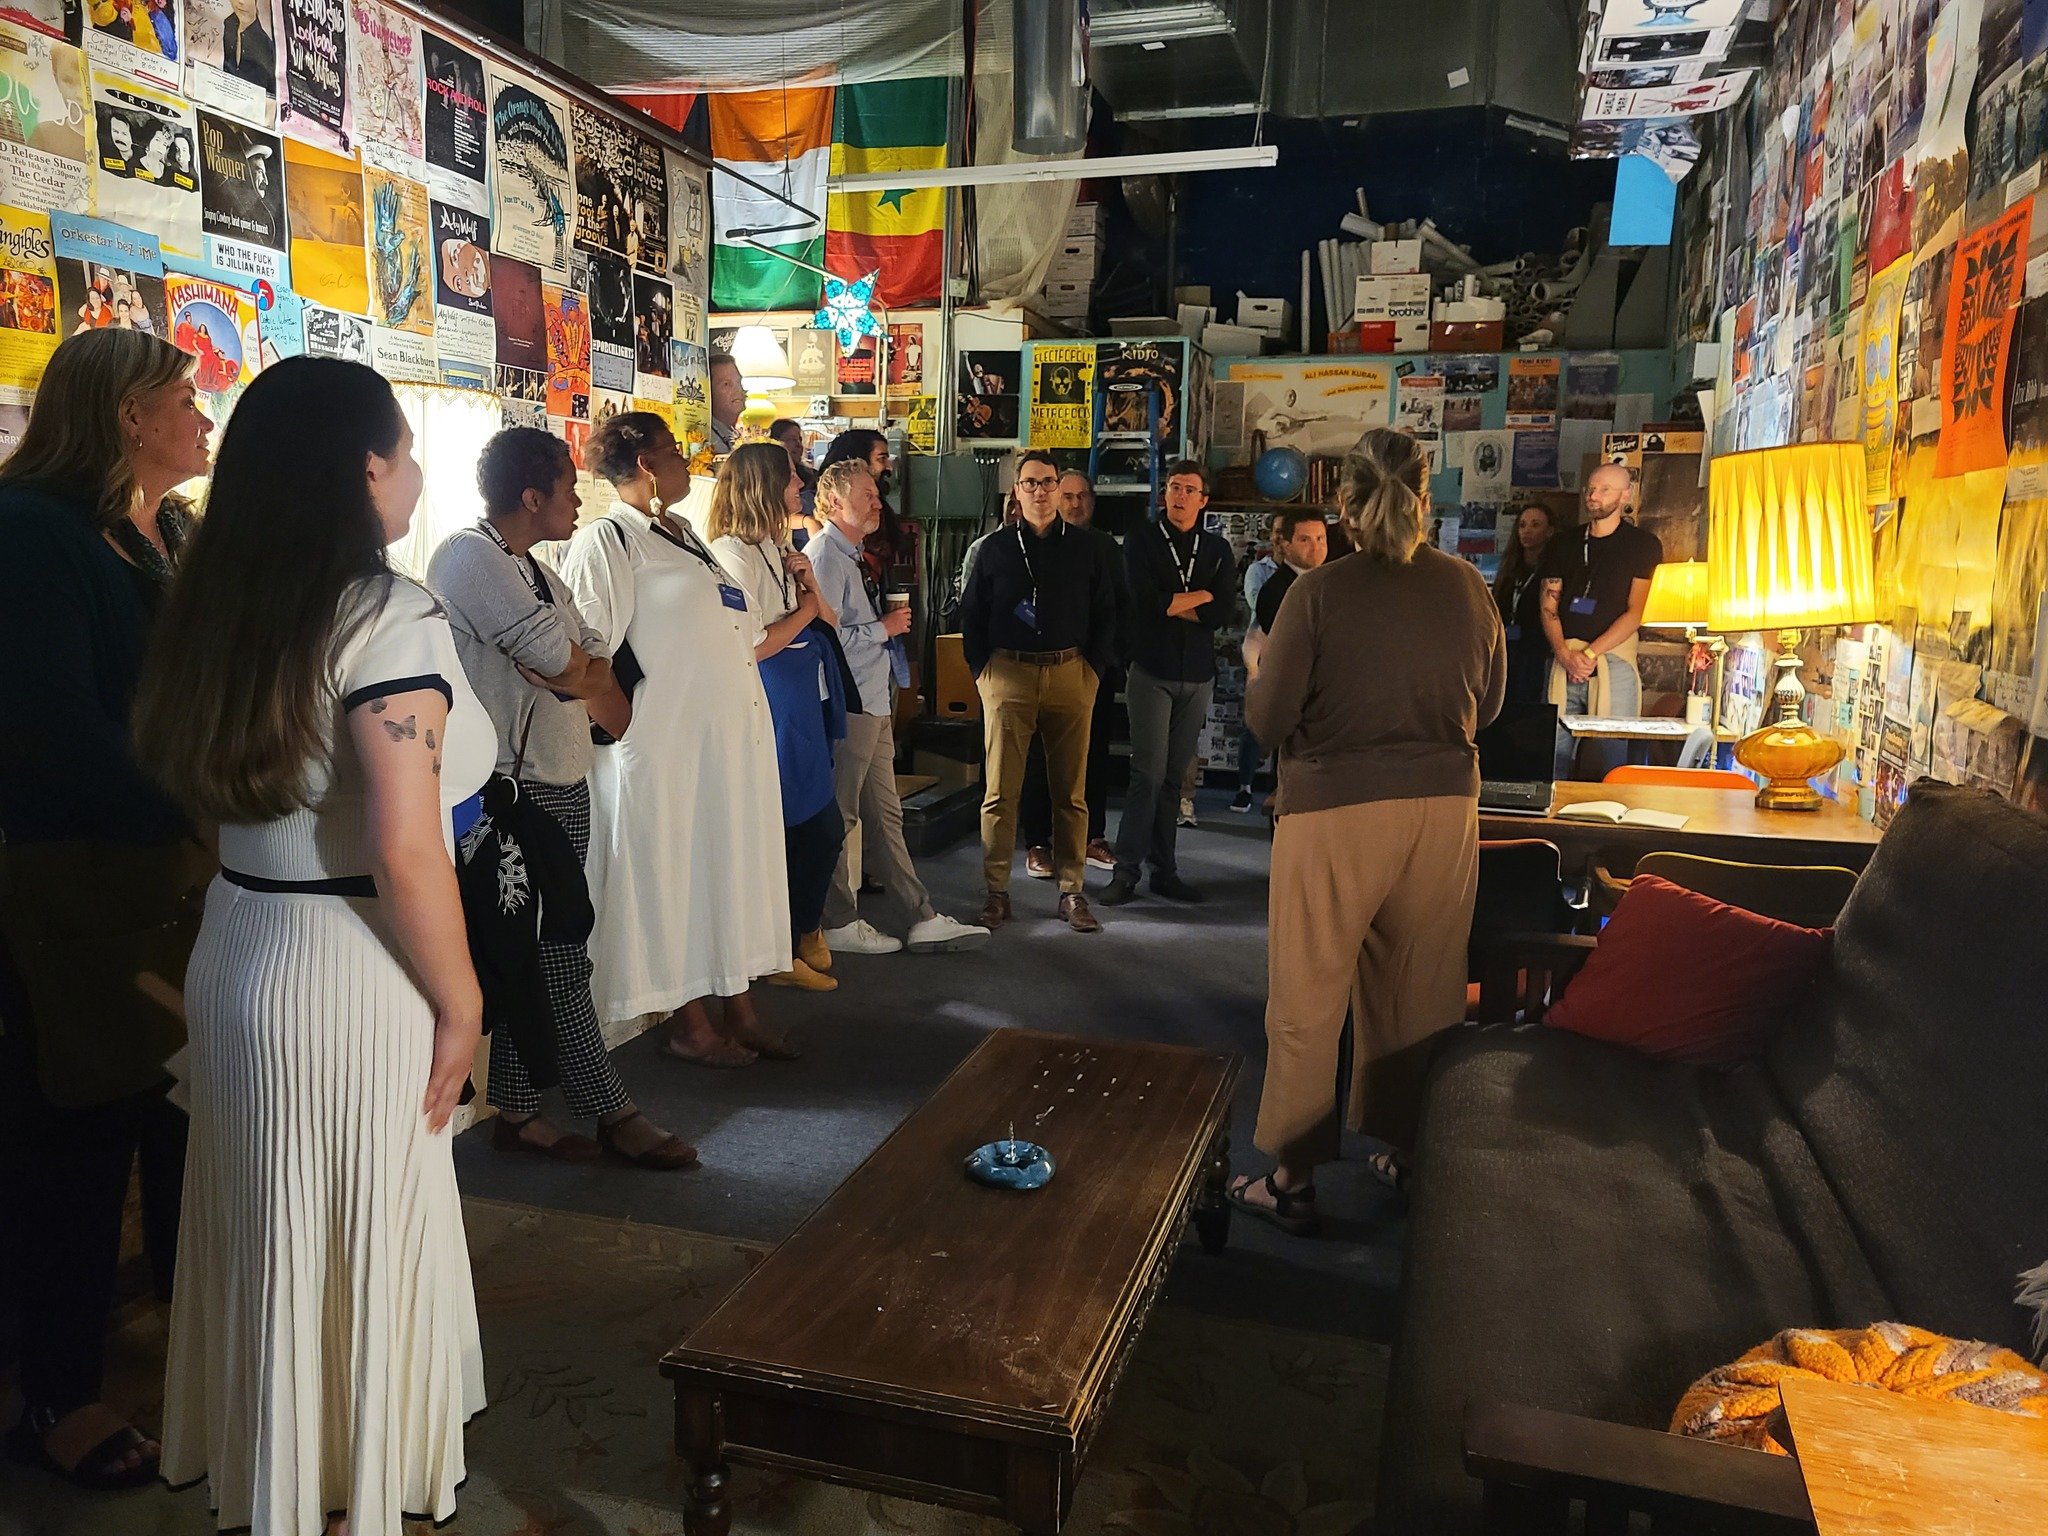 The Cedar Cultural Center was delighted to host attendees of the American Journalism Project's AJPalooza this year, a gathering of nonprofit news organizations and funders from around the country. Thank you to our friends at Sahan Journal - celebrati